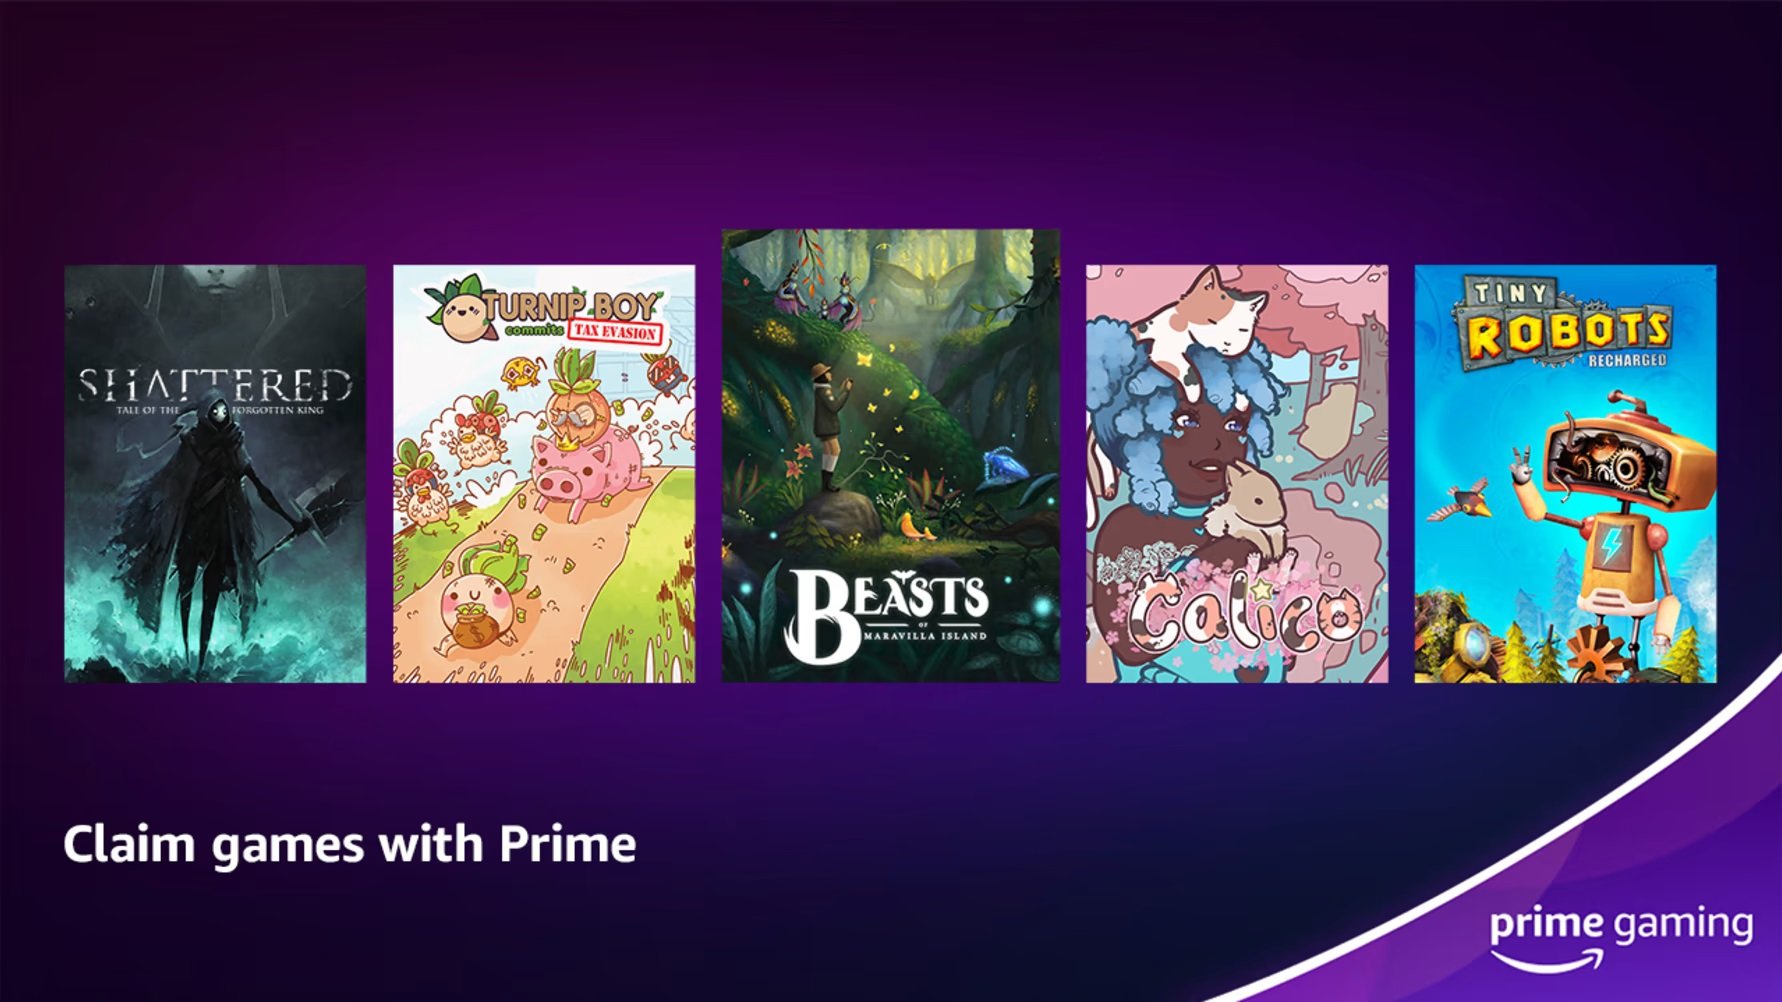 Prime members now get exclusive free mobile game loot and